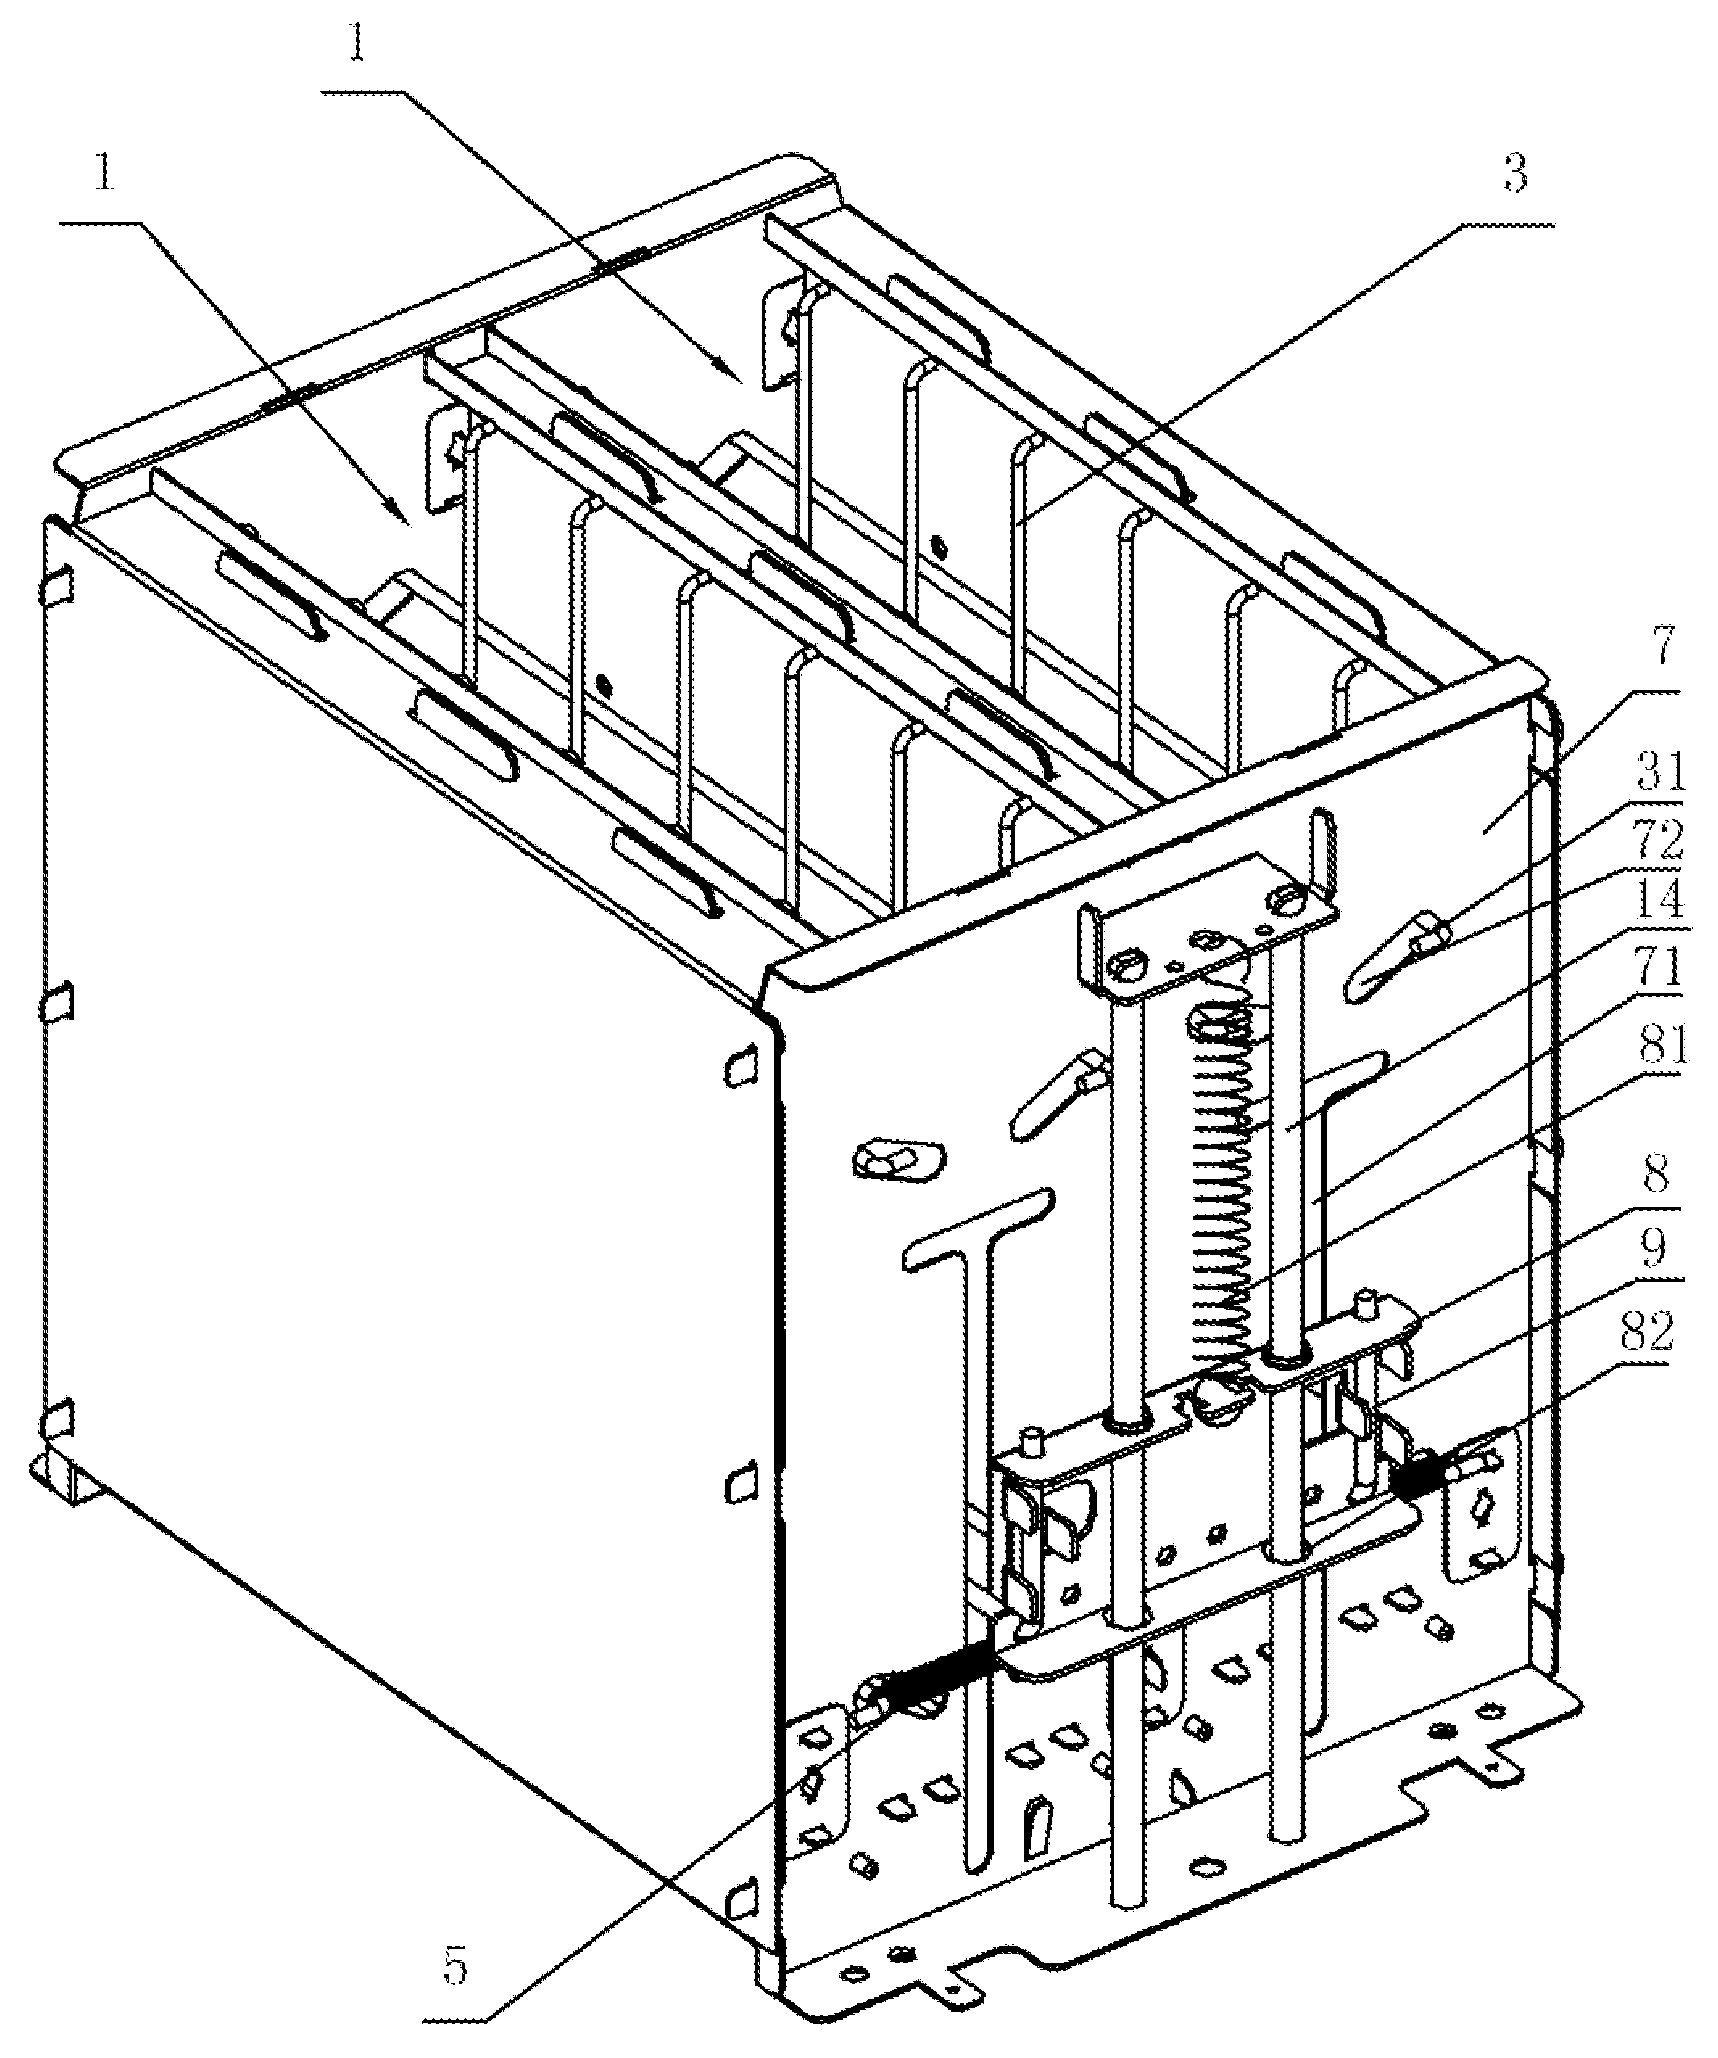 Toaster chassis